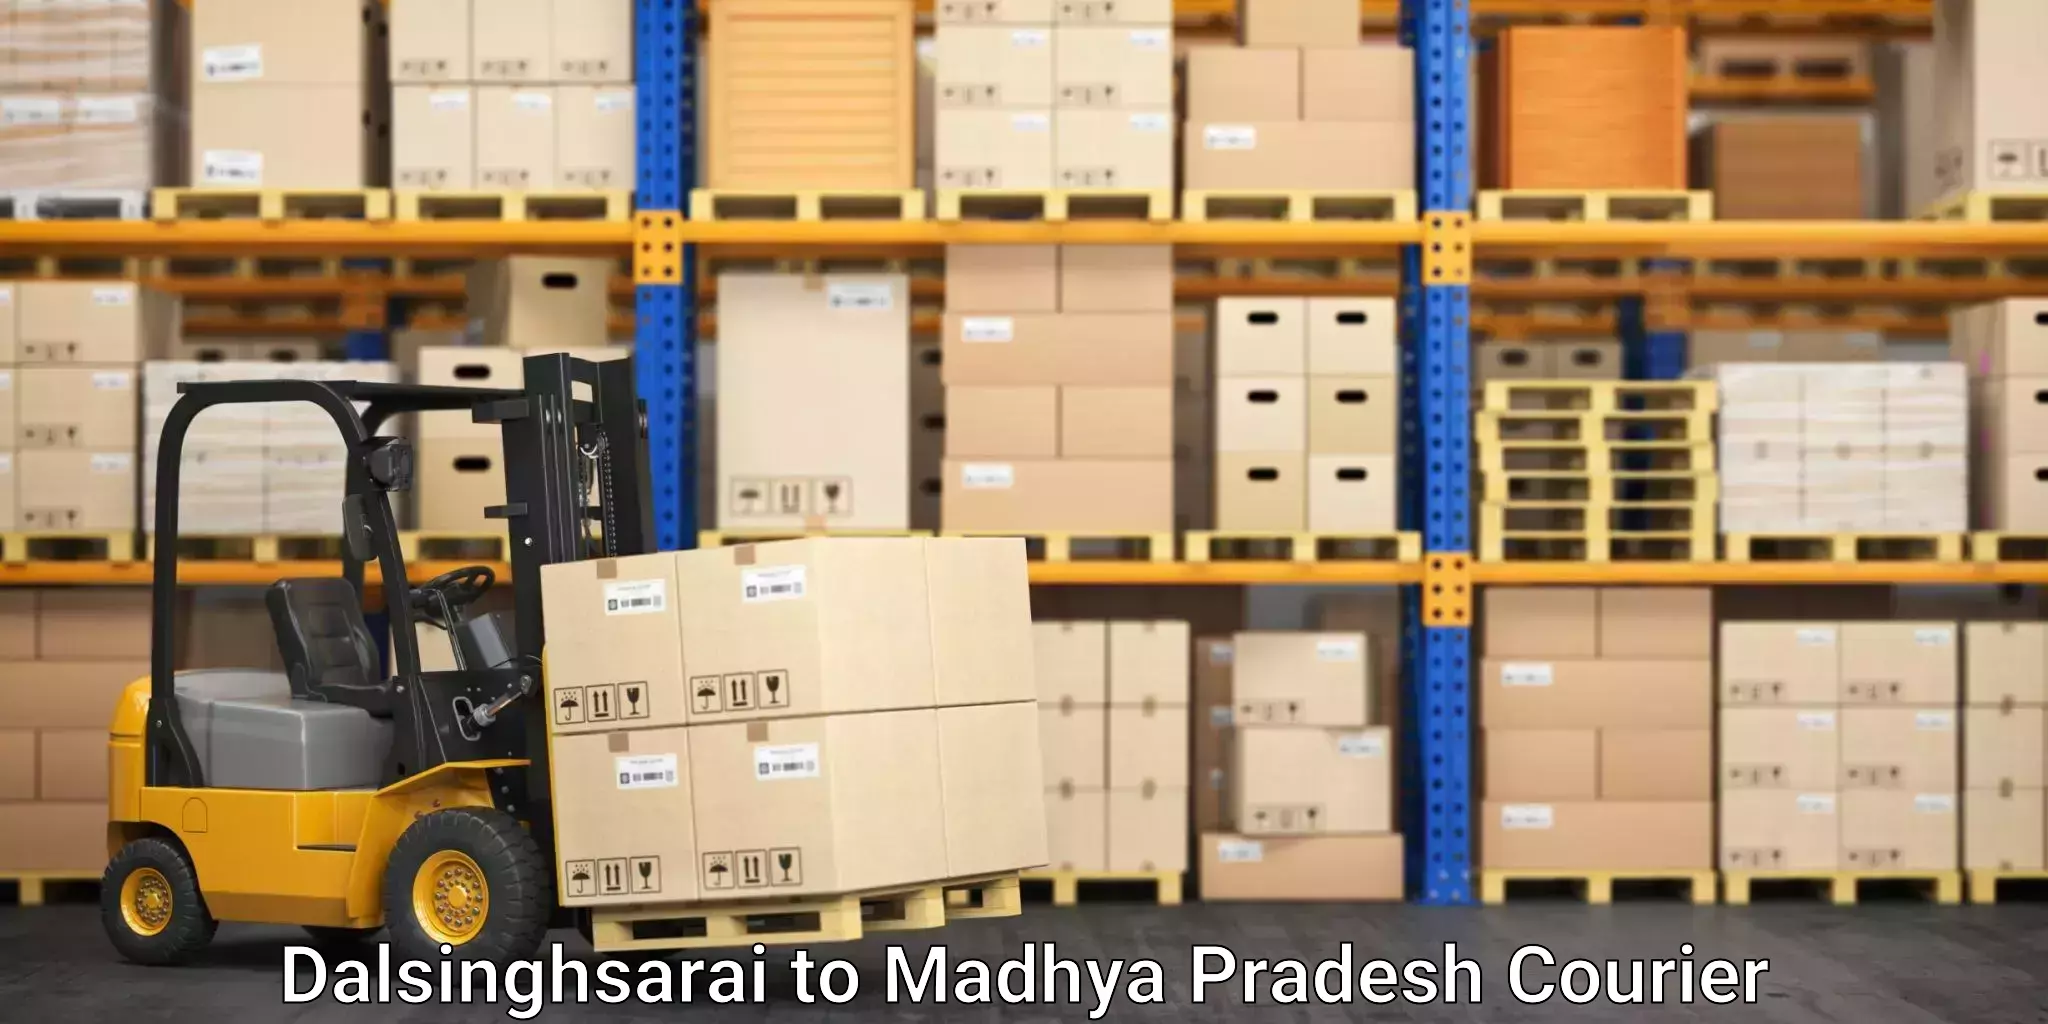 Moving and storage services in Dalsinghsarai to IIT Indore